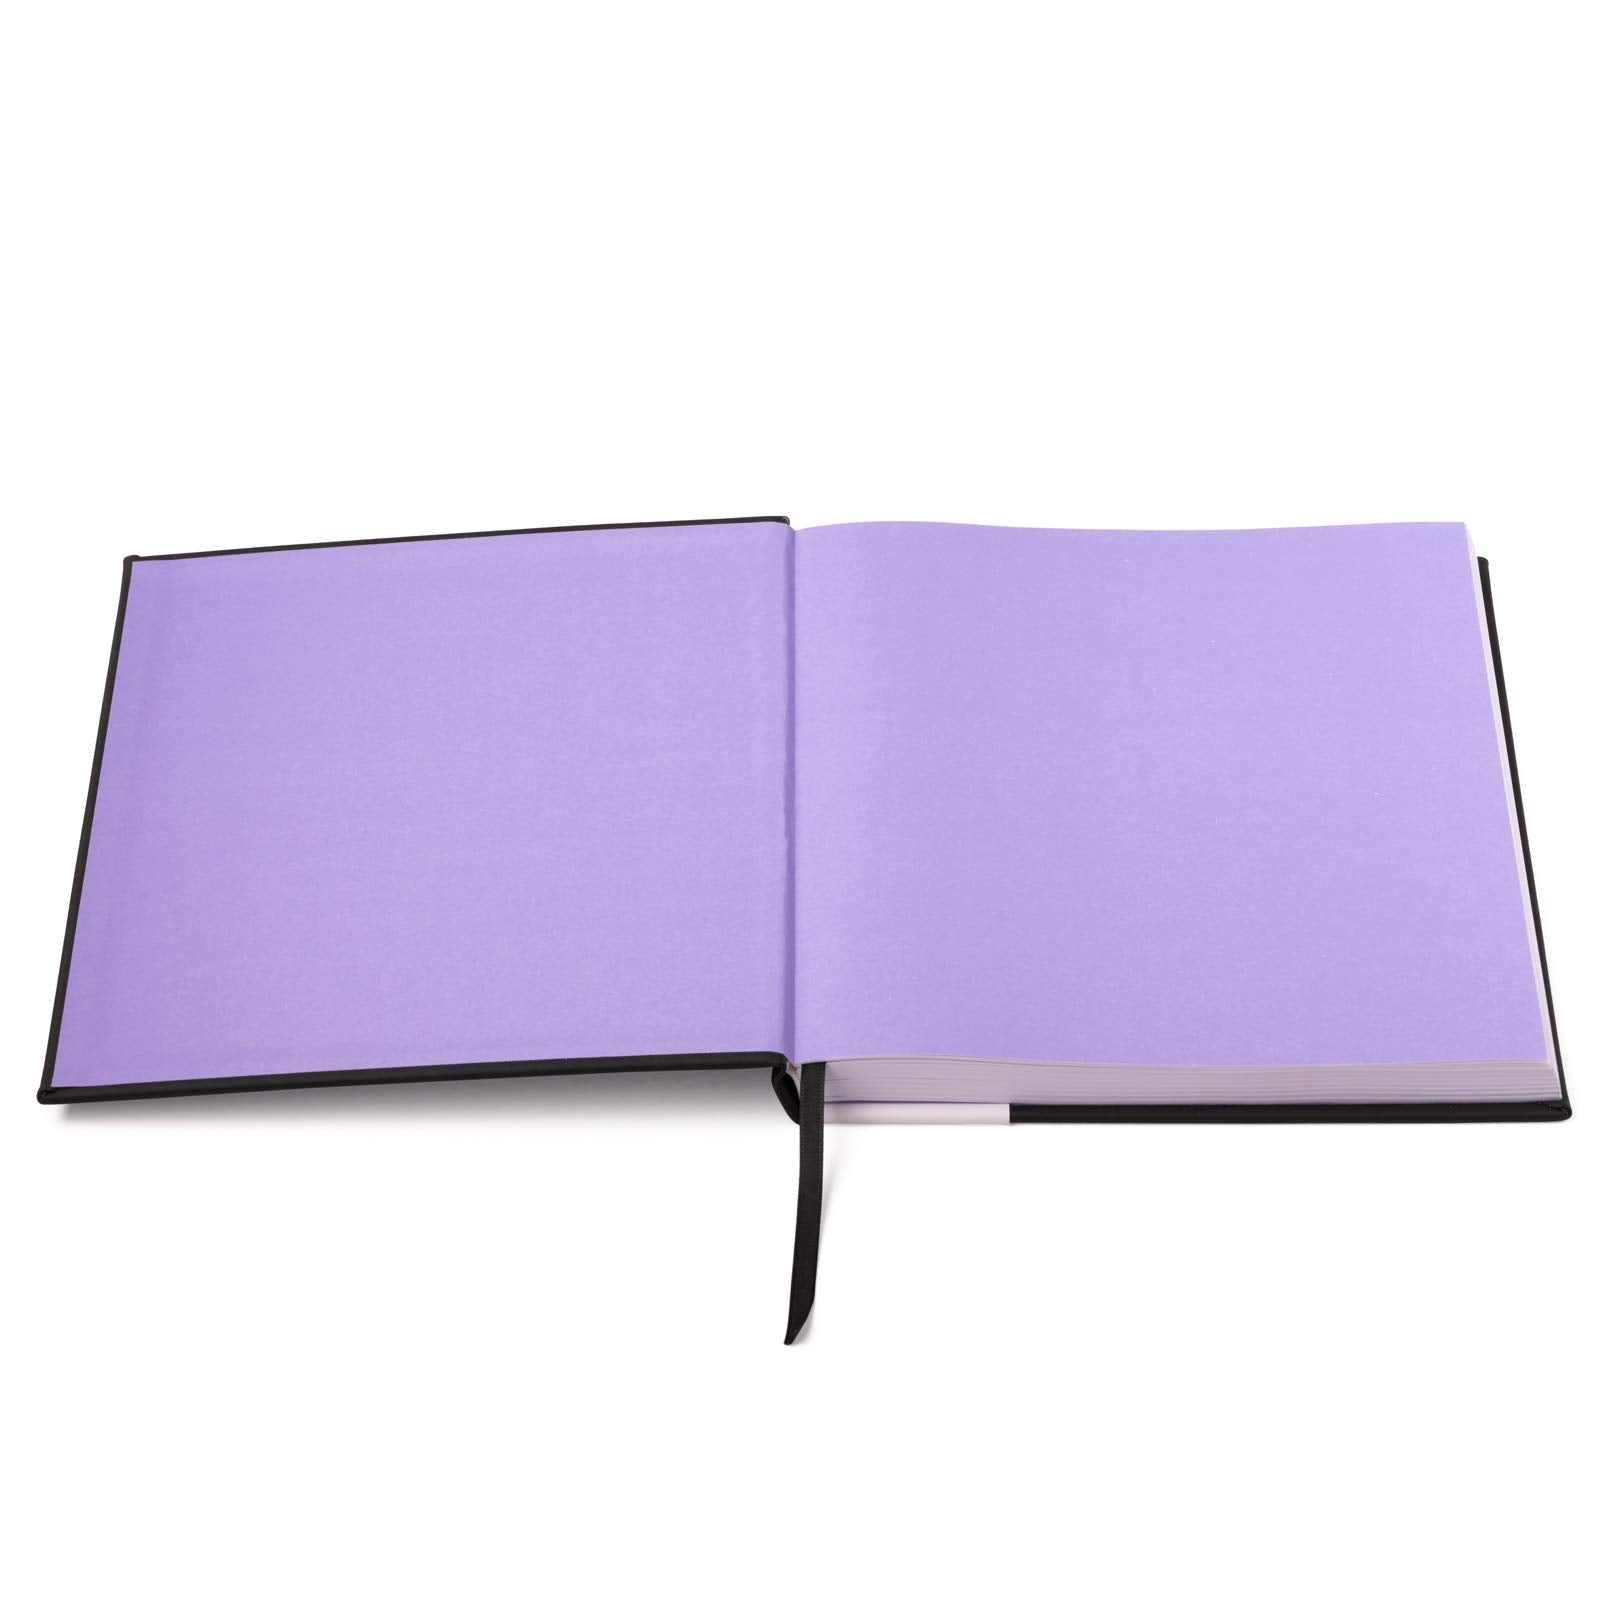 Eccolo Lined Journal Notebook for Writing